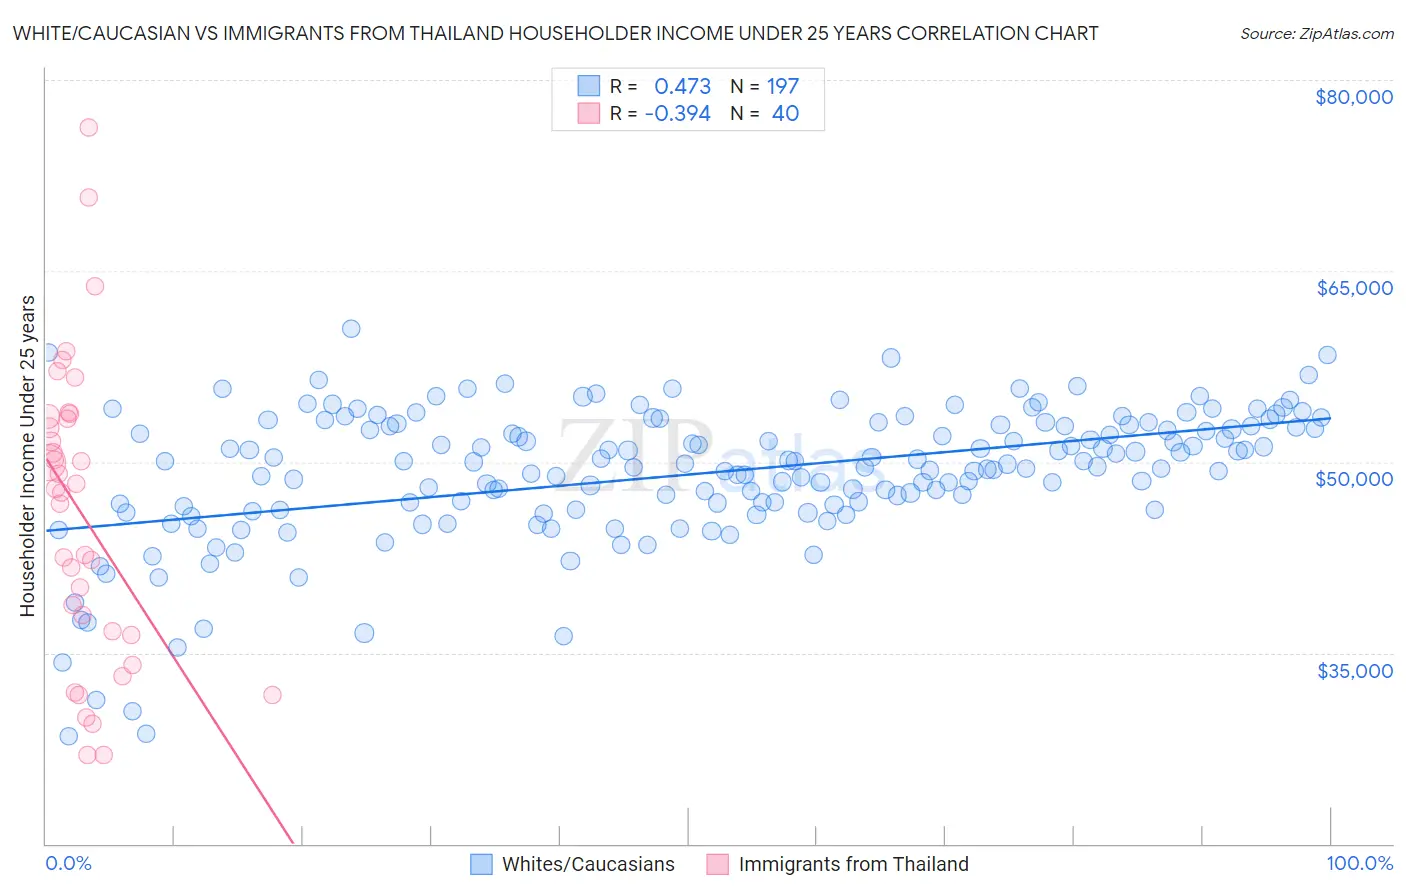 White/Caucasian vs Immigrants from Thailand Householder Income Under 25 years